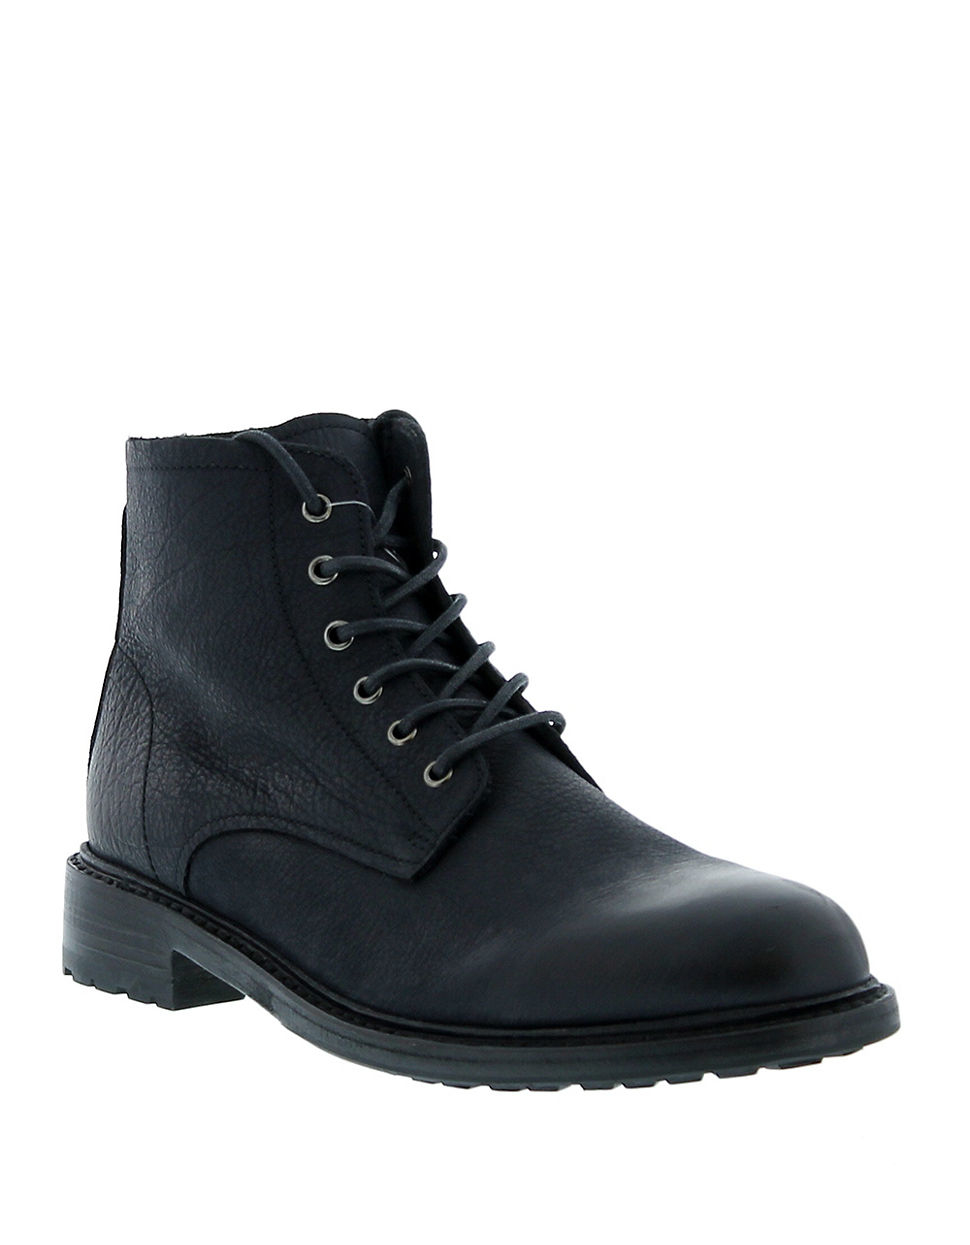 Lyst - Blackstone Leather Lace Up Boots in Black